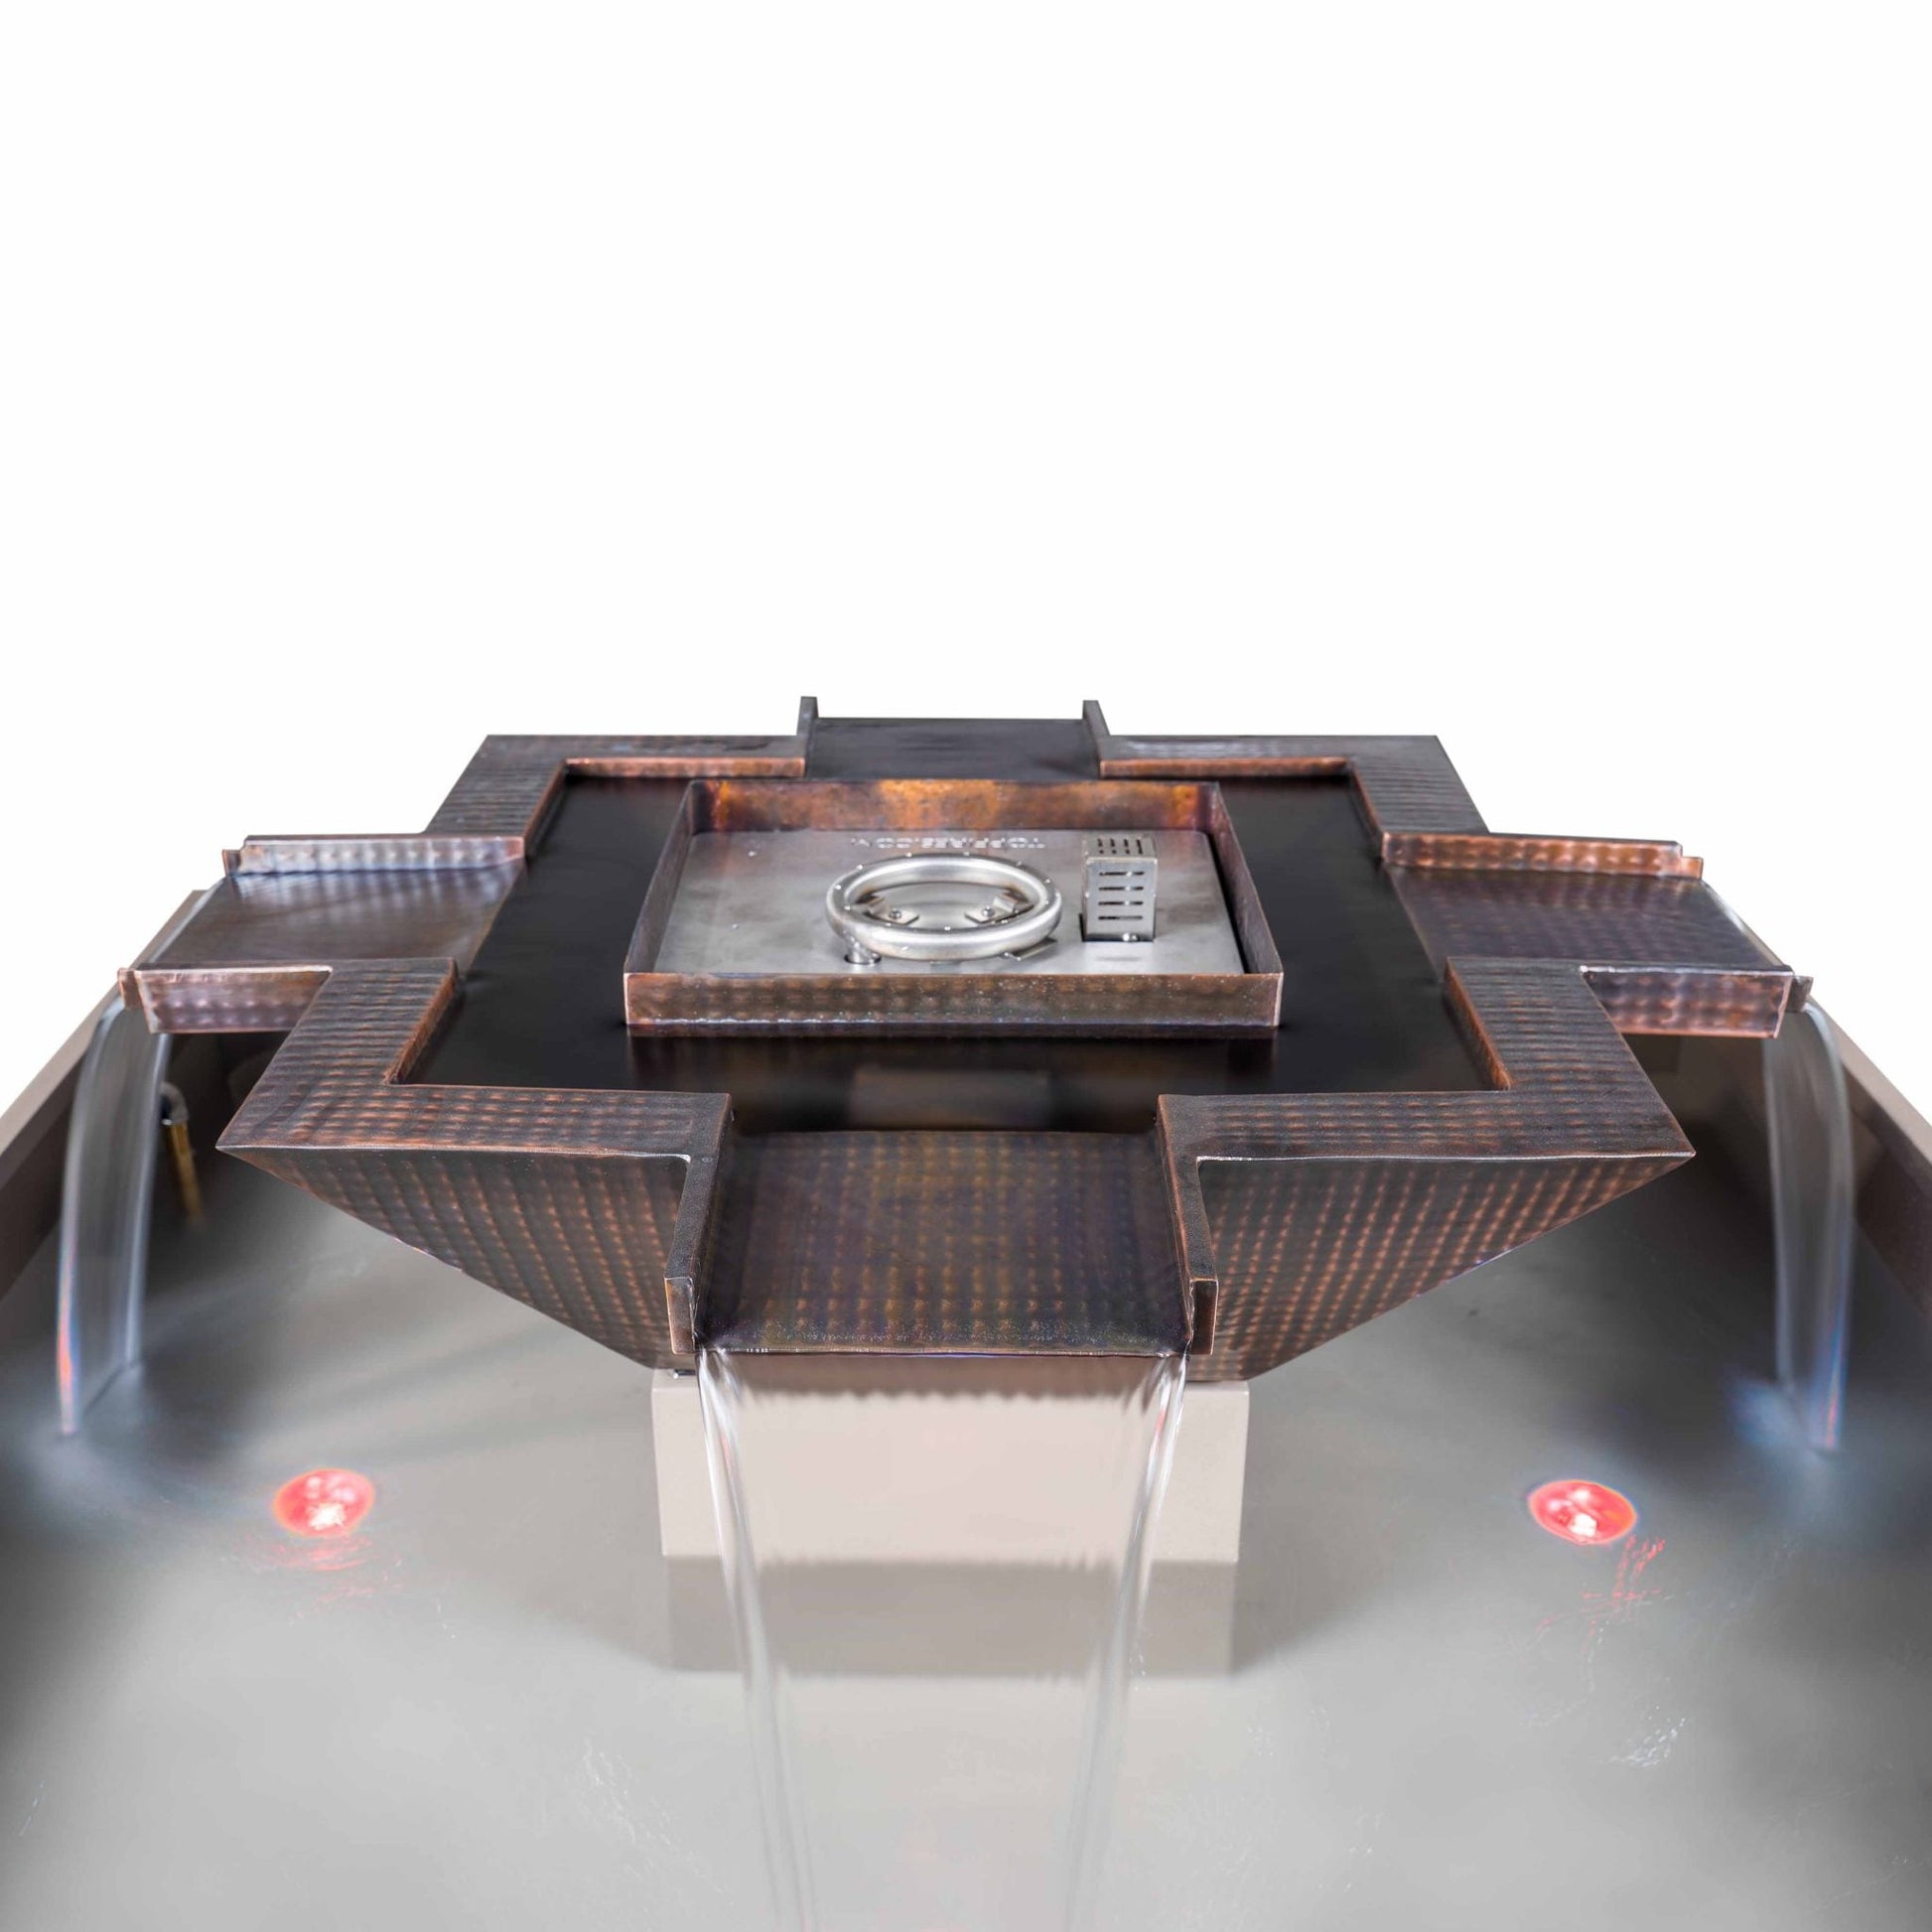 The Outdoor Plus Square Olympian 60" Copper Natural Gas Fire & 4-Way Spill Water Fountain with 12V Electronic Ignition